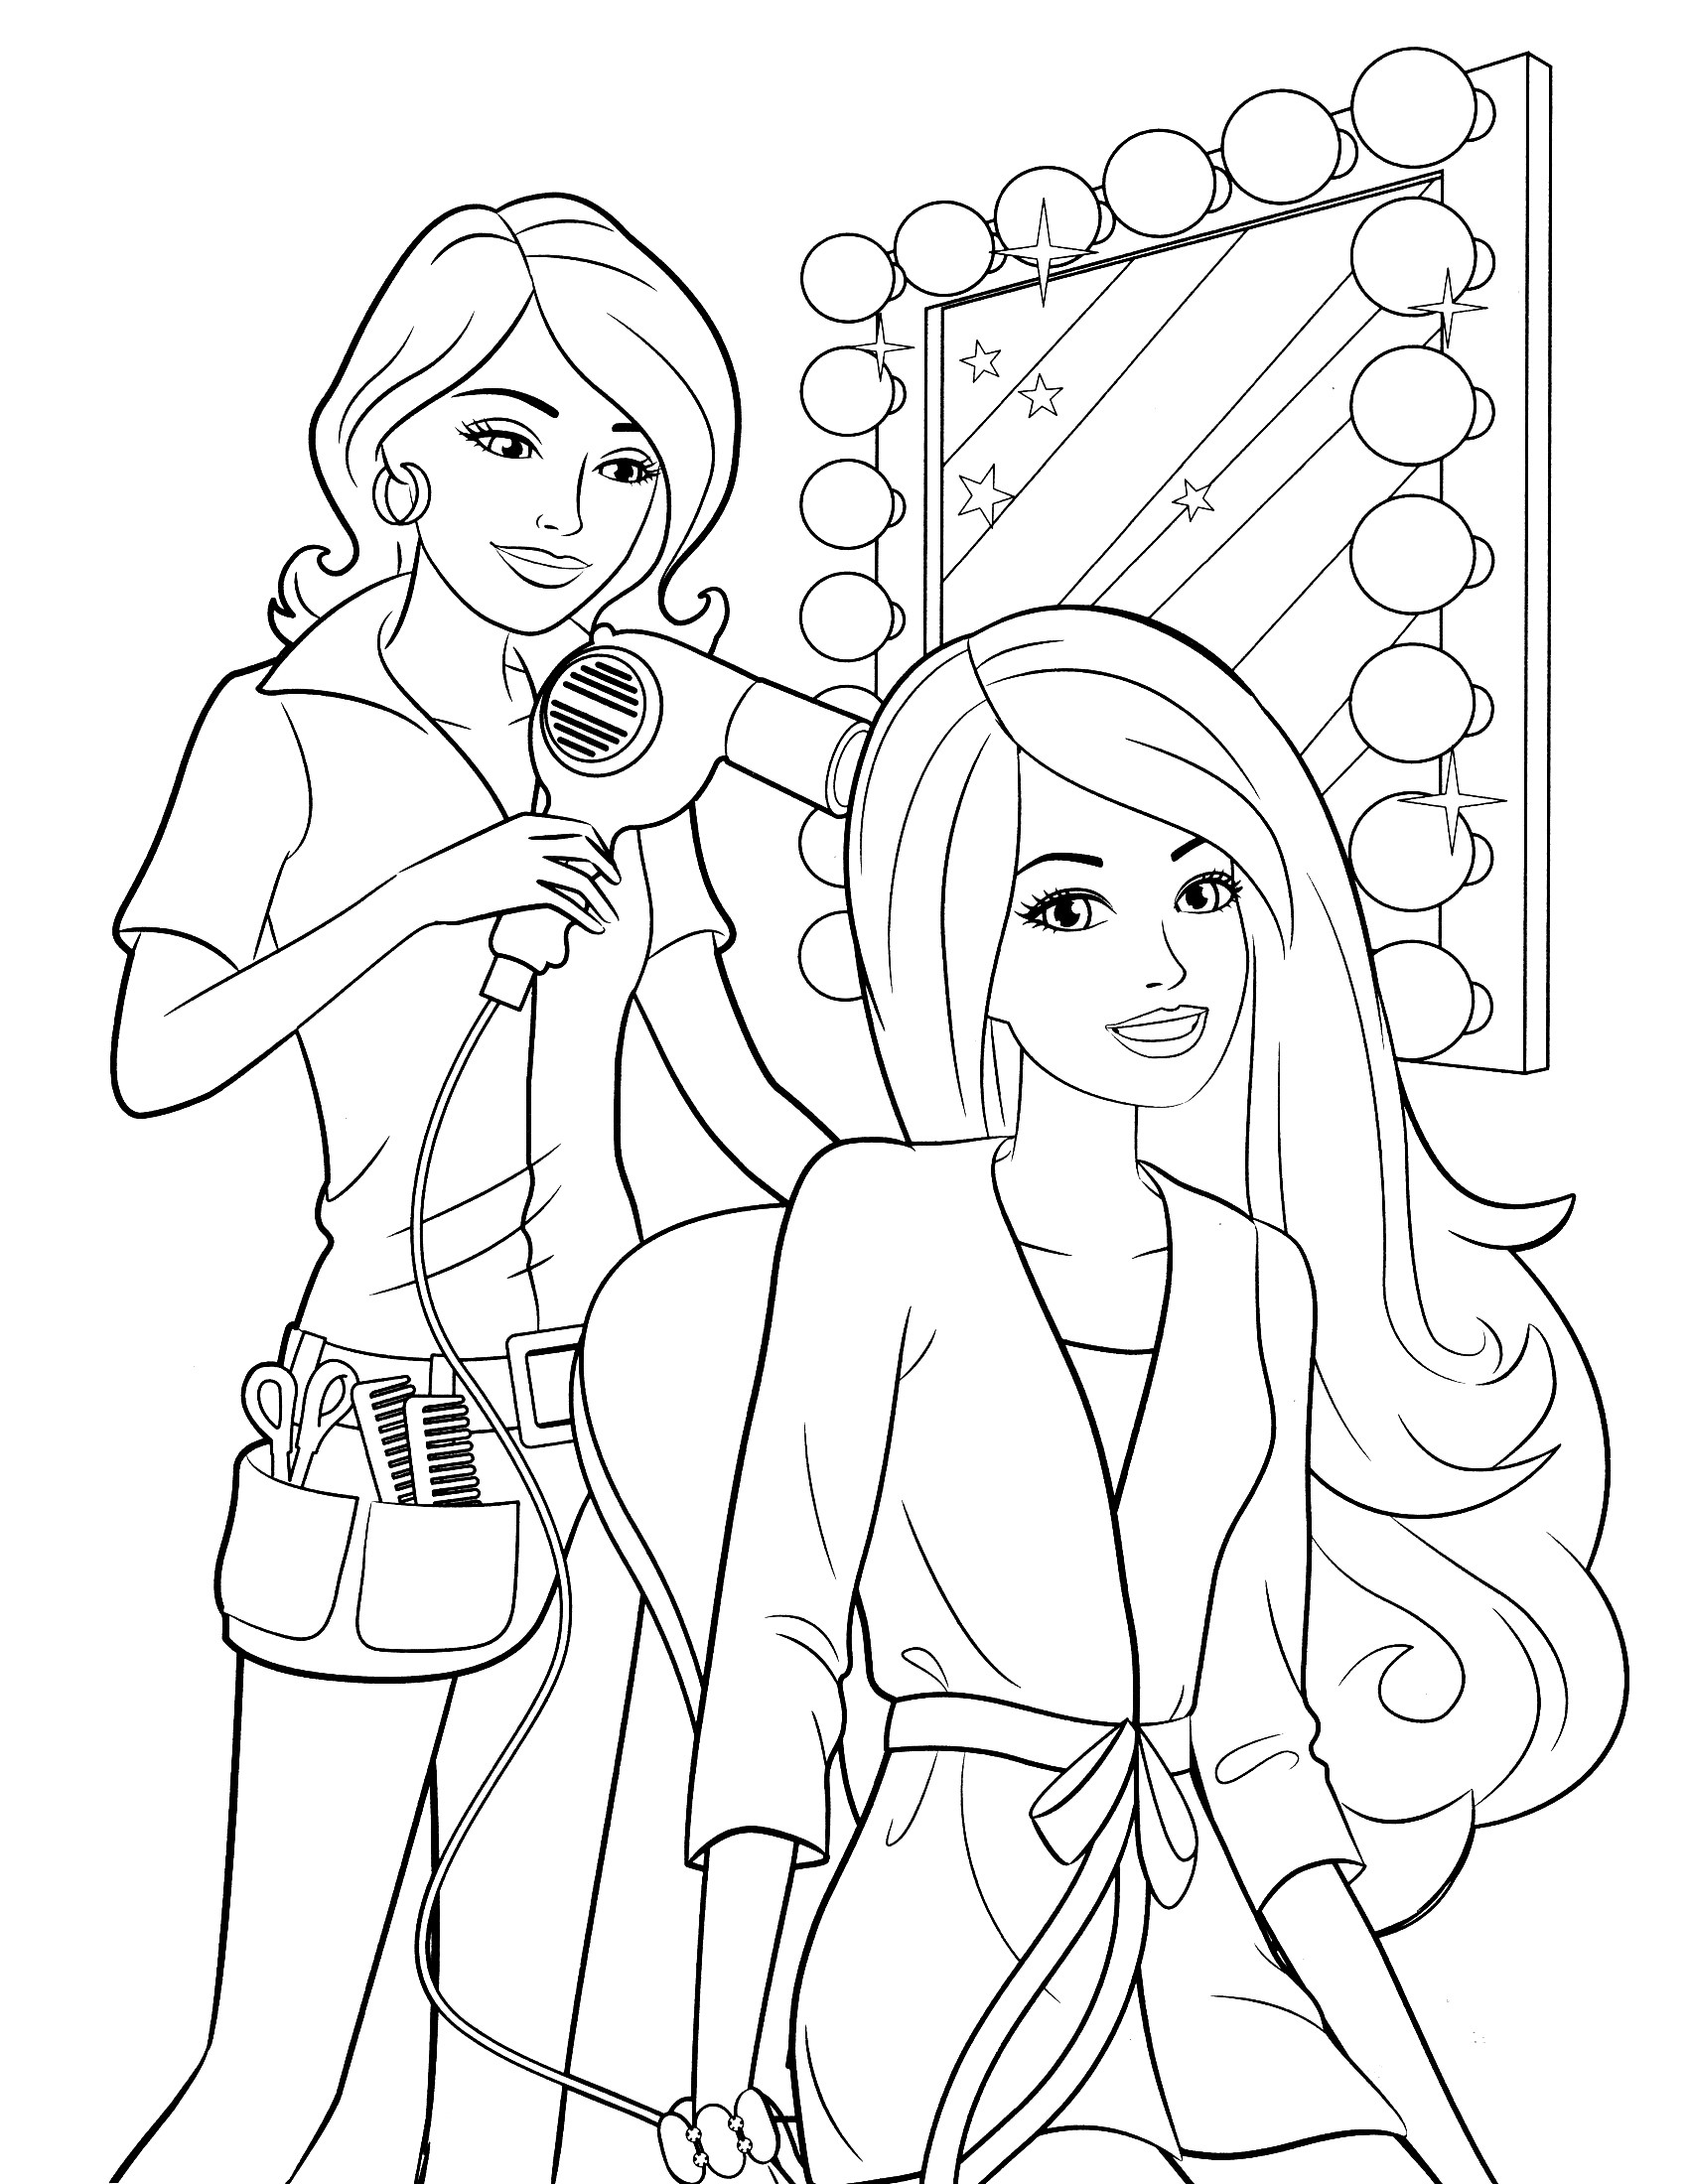 Fashion Coloring Pages For Girls
 Coloring Pages for Girls Best Coloring Pages For Kids